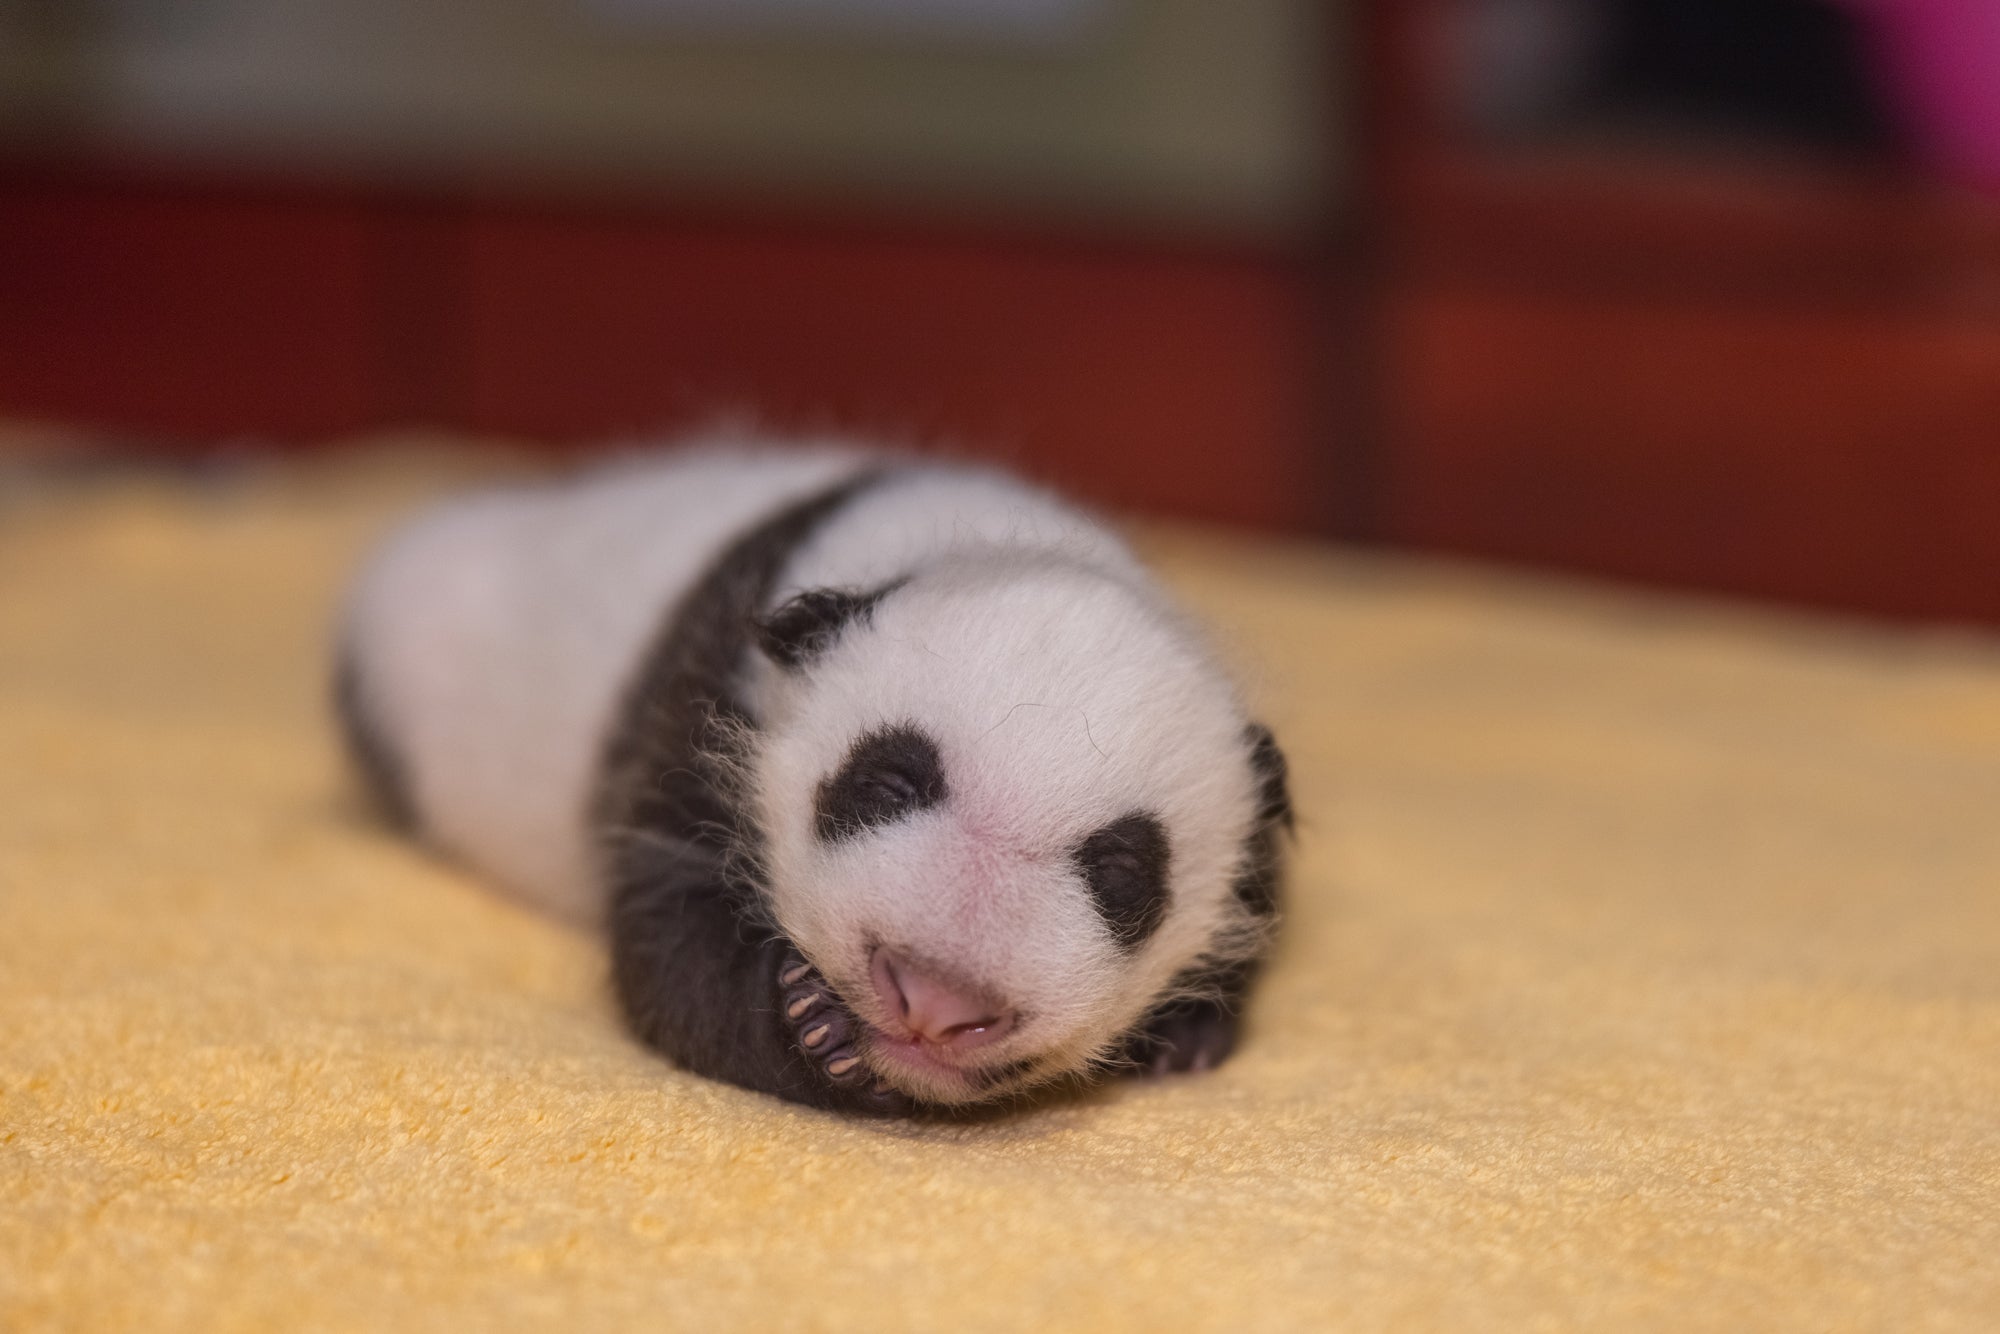 A 1-month-old giant panda cub with black-and-white markings, a thin layer of fur and small claws lays on a towel with its head resting on its paw